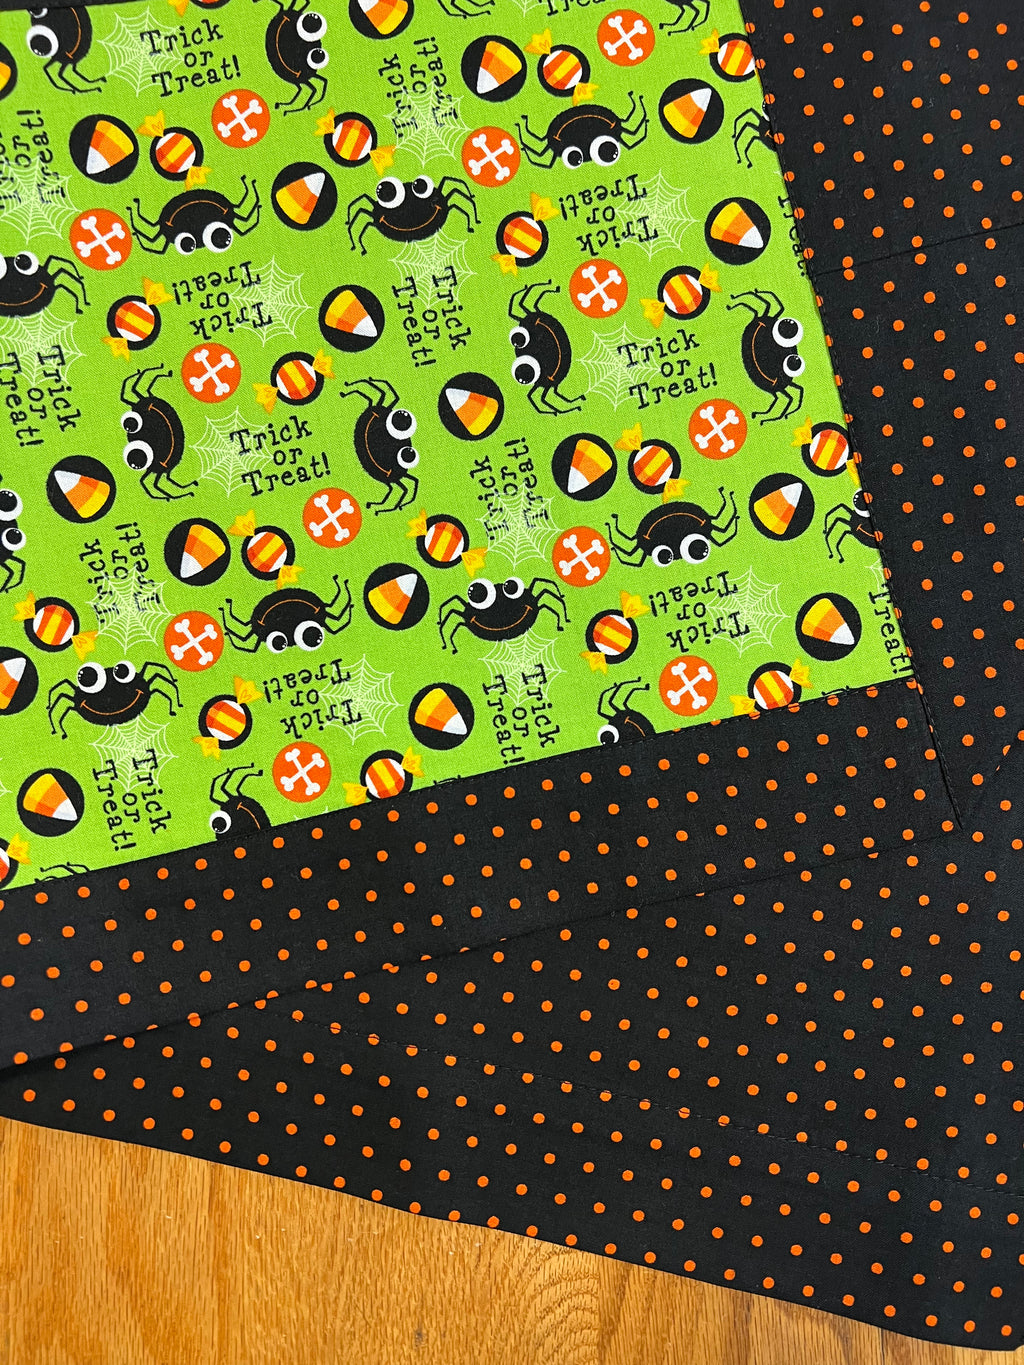 CHRIS' CREATIONS #H2 Trick Or Treat Spiders table runner